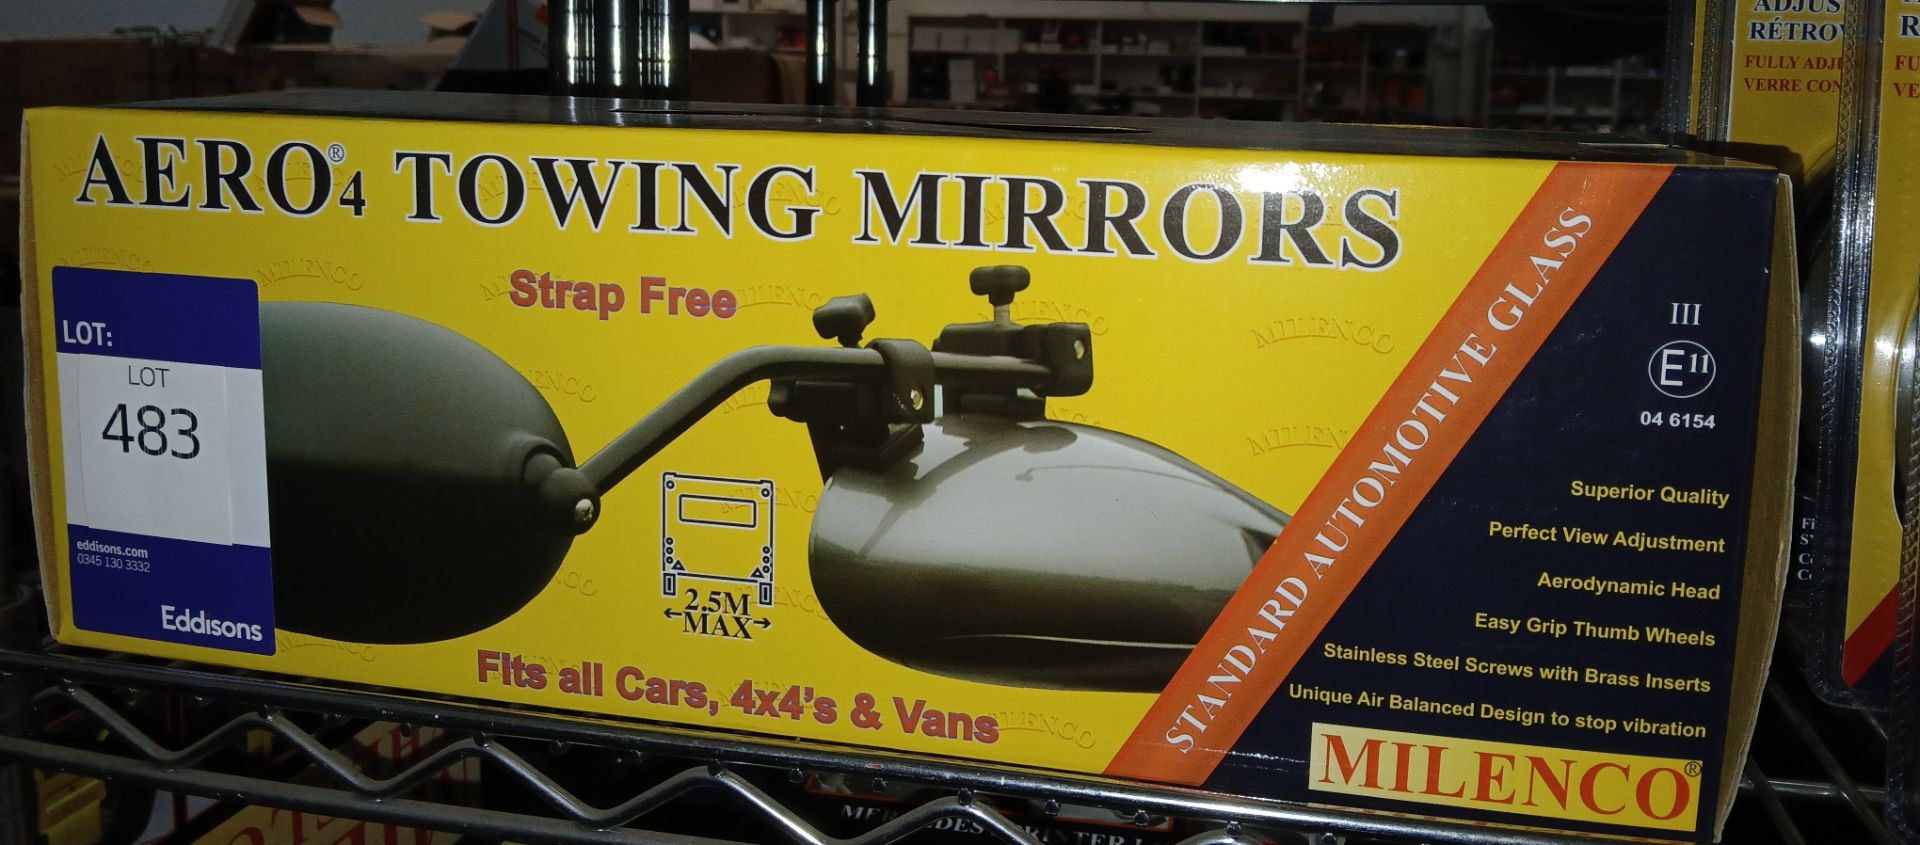 Milenco Aero 4 Towing Mirrors (Please note, Viewing Strongly Recommended - Eddisons have not